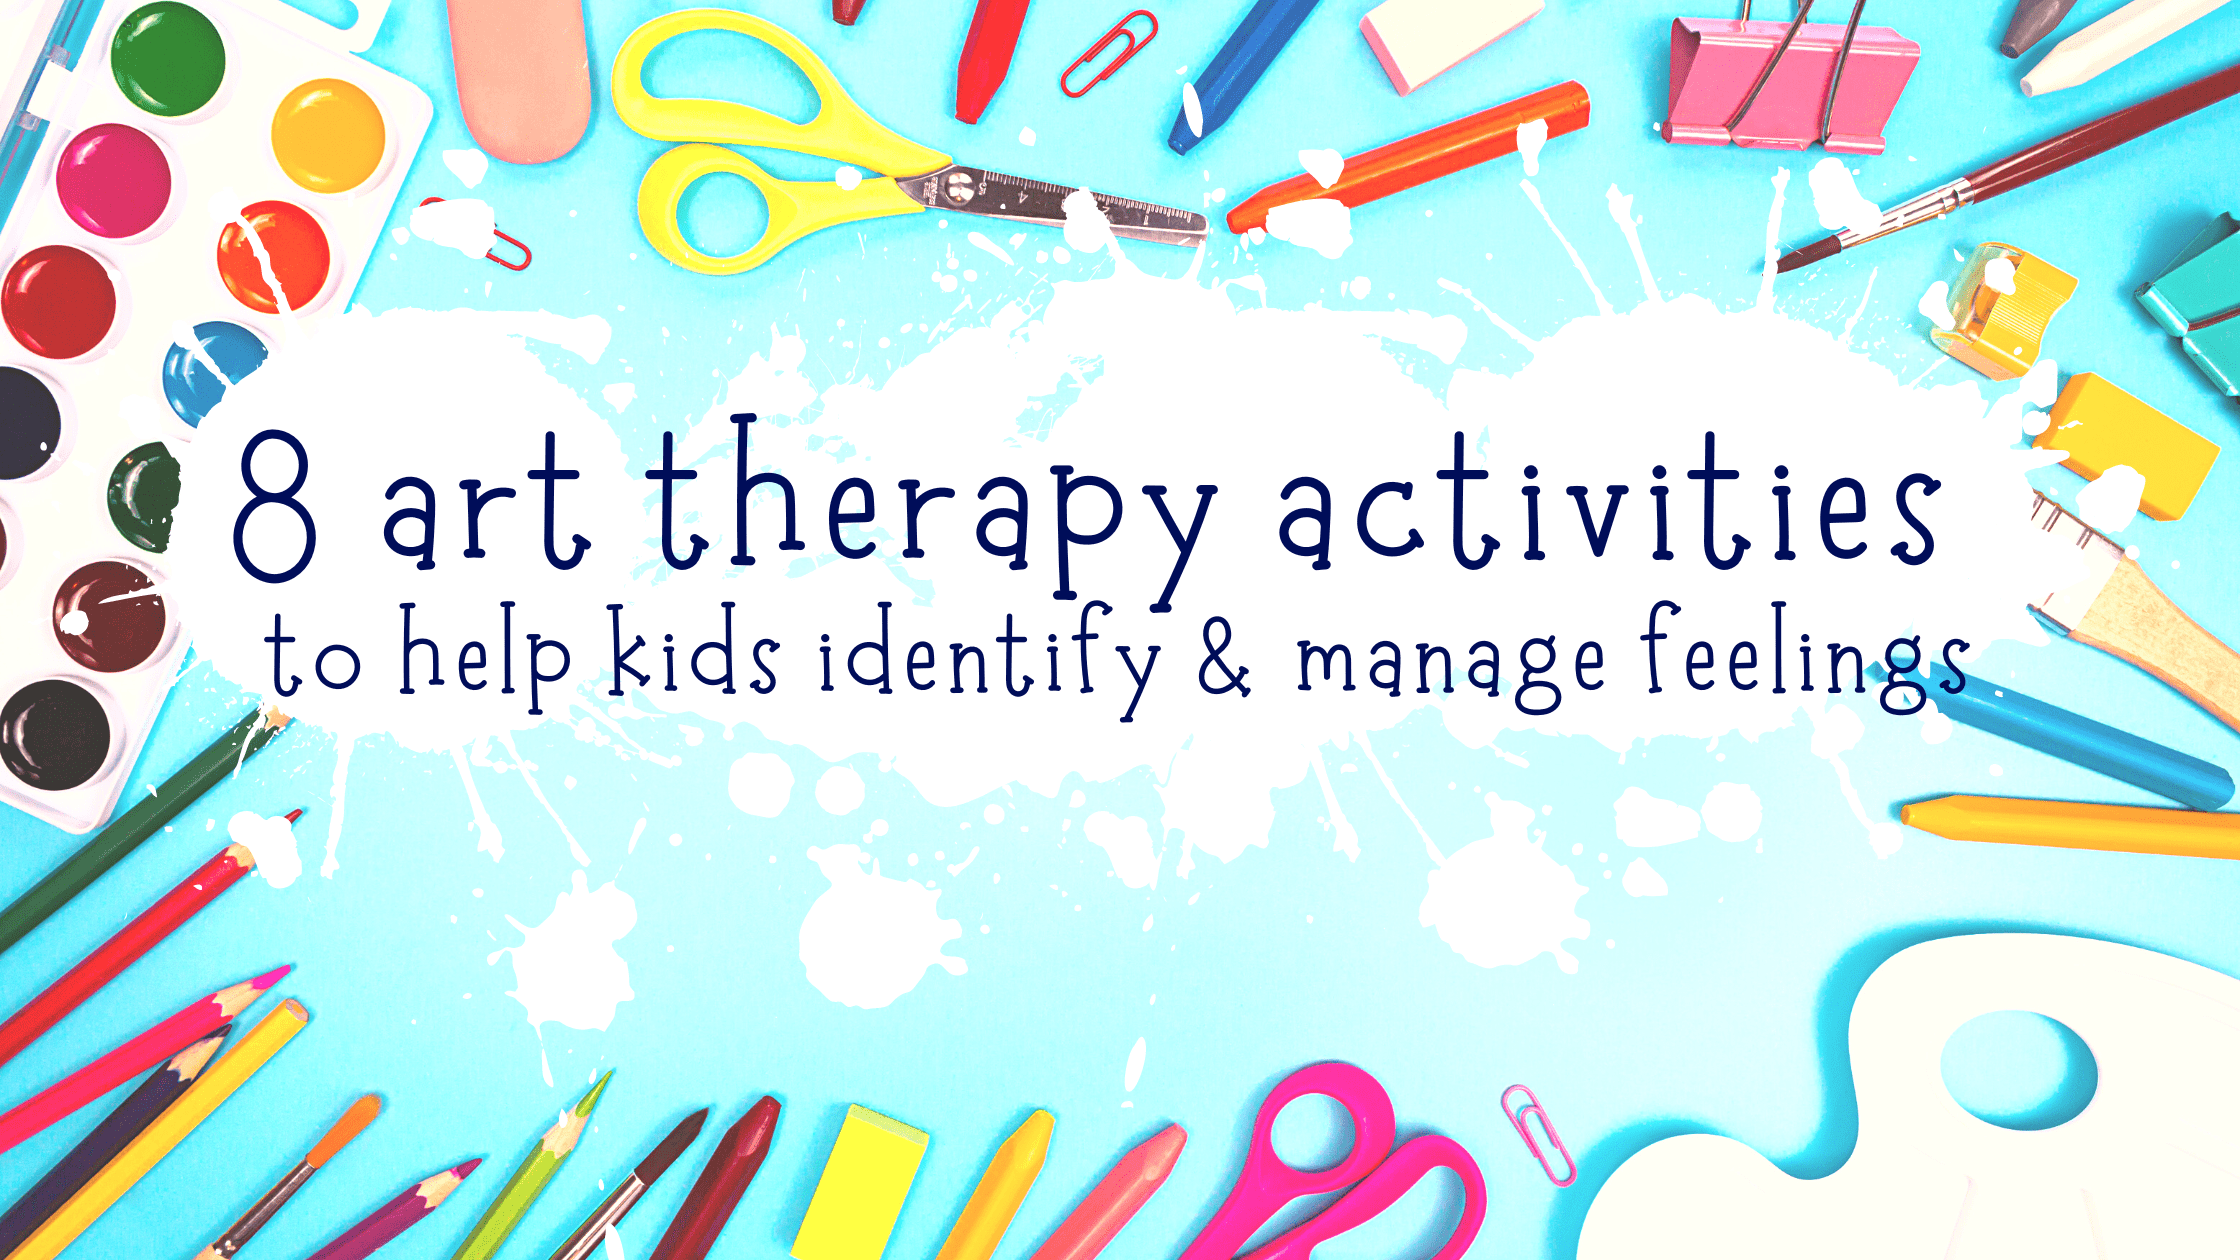 Art Therapy, Art Therapy Activities, what is Art Therapy, Art Therapy helps kids, Art Therapy for children, therapy, art